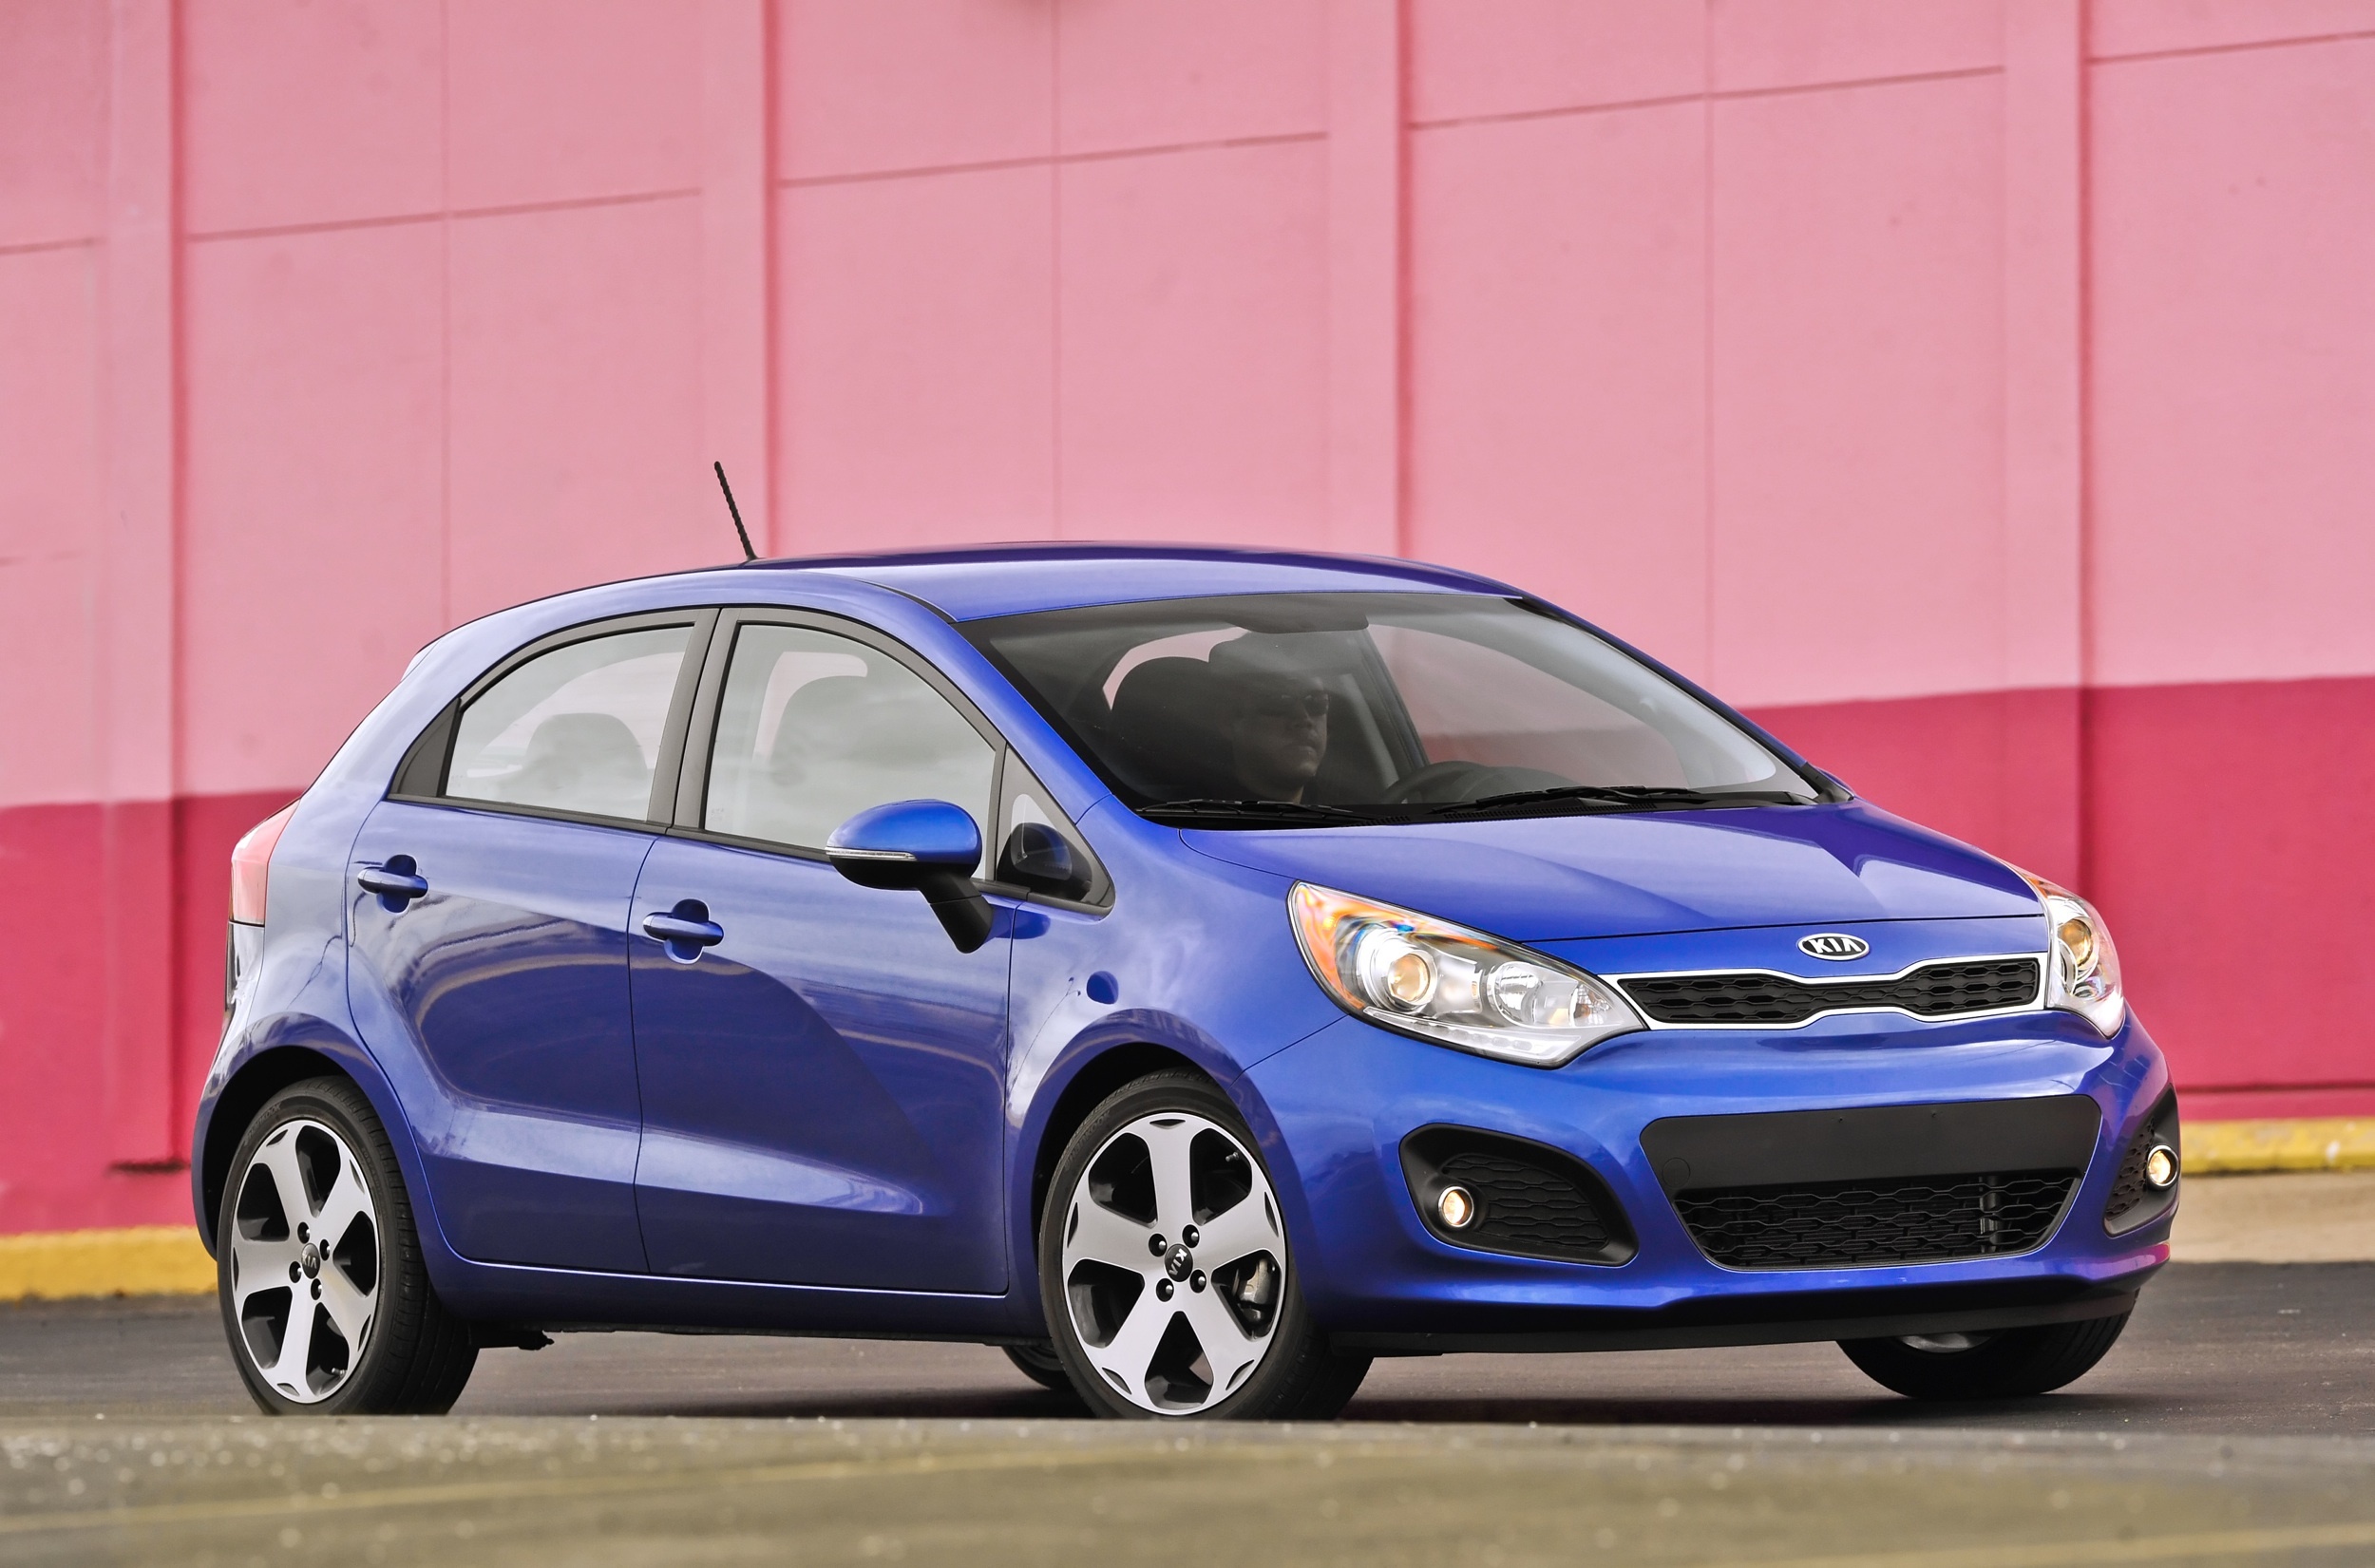 Kia Rio Wallpapers (39+ images inside)